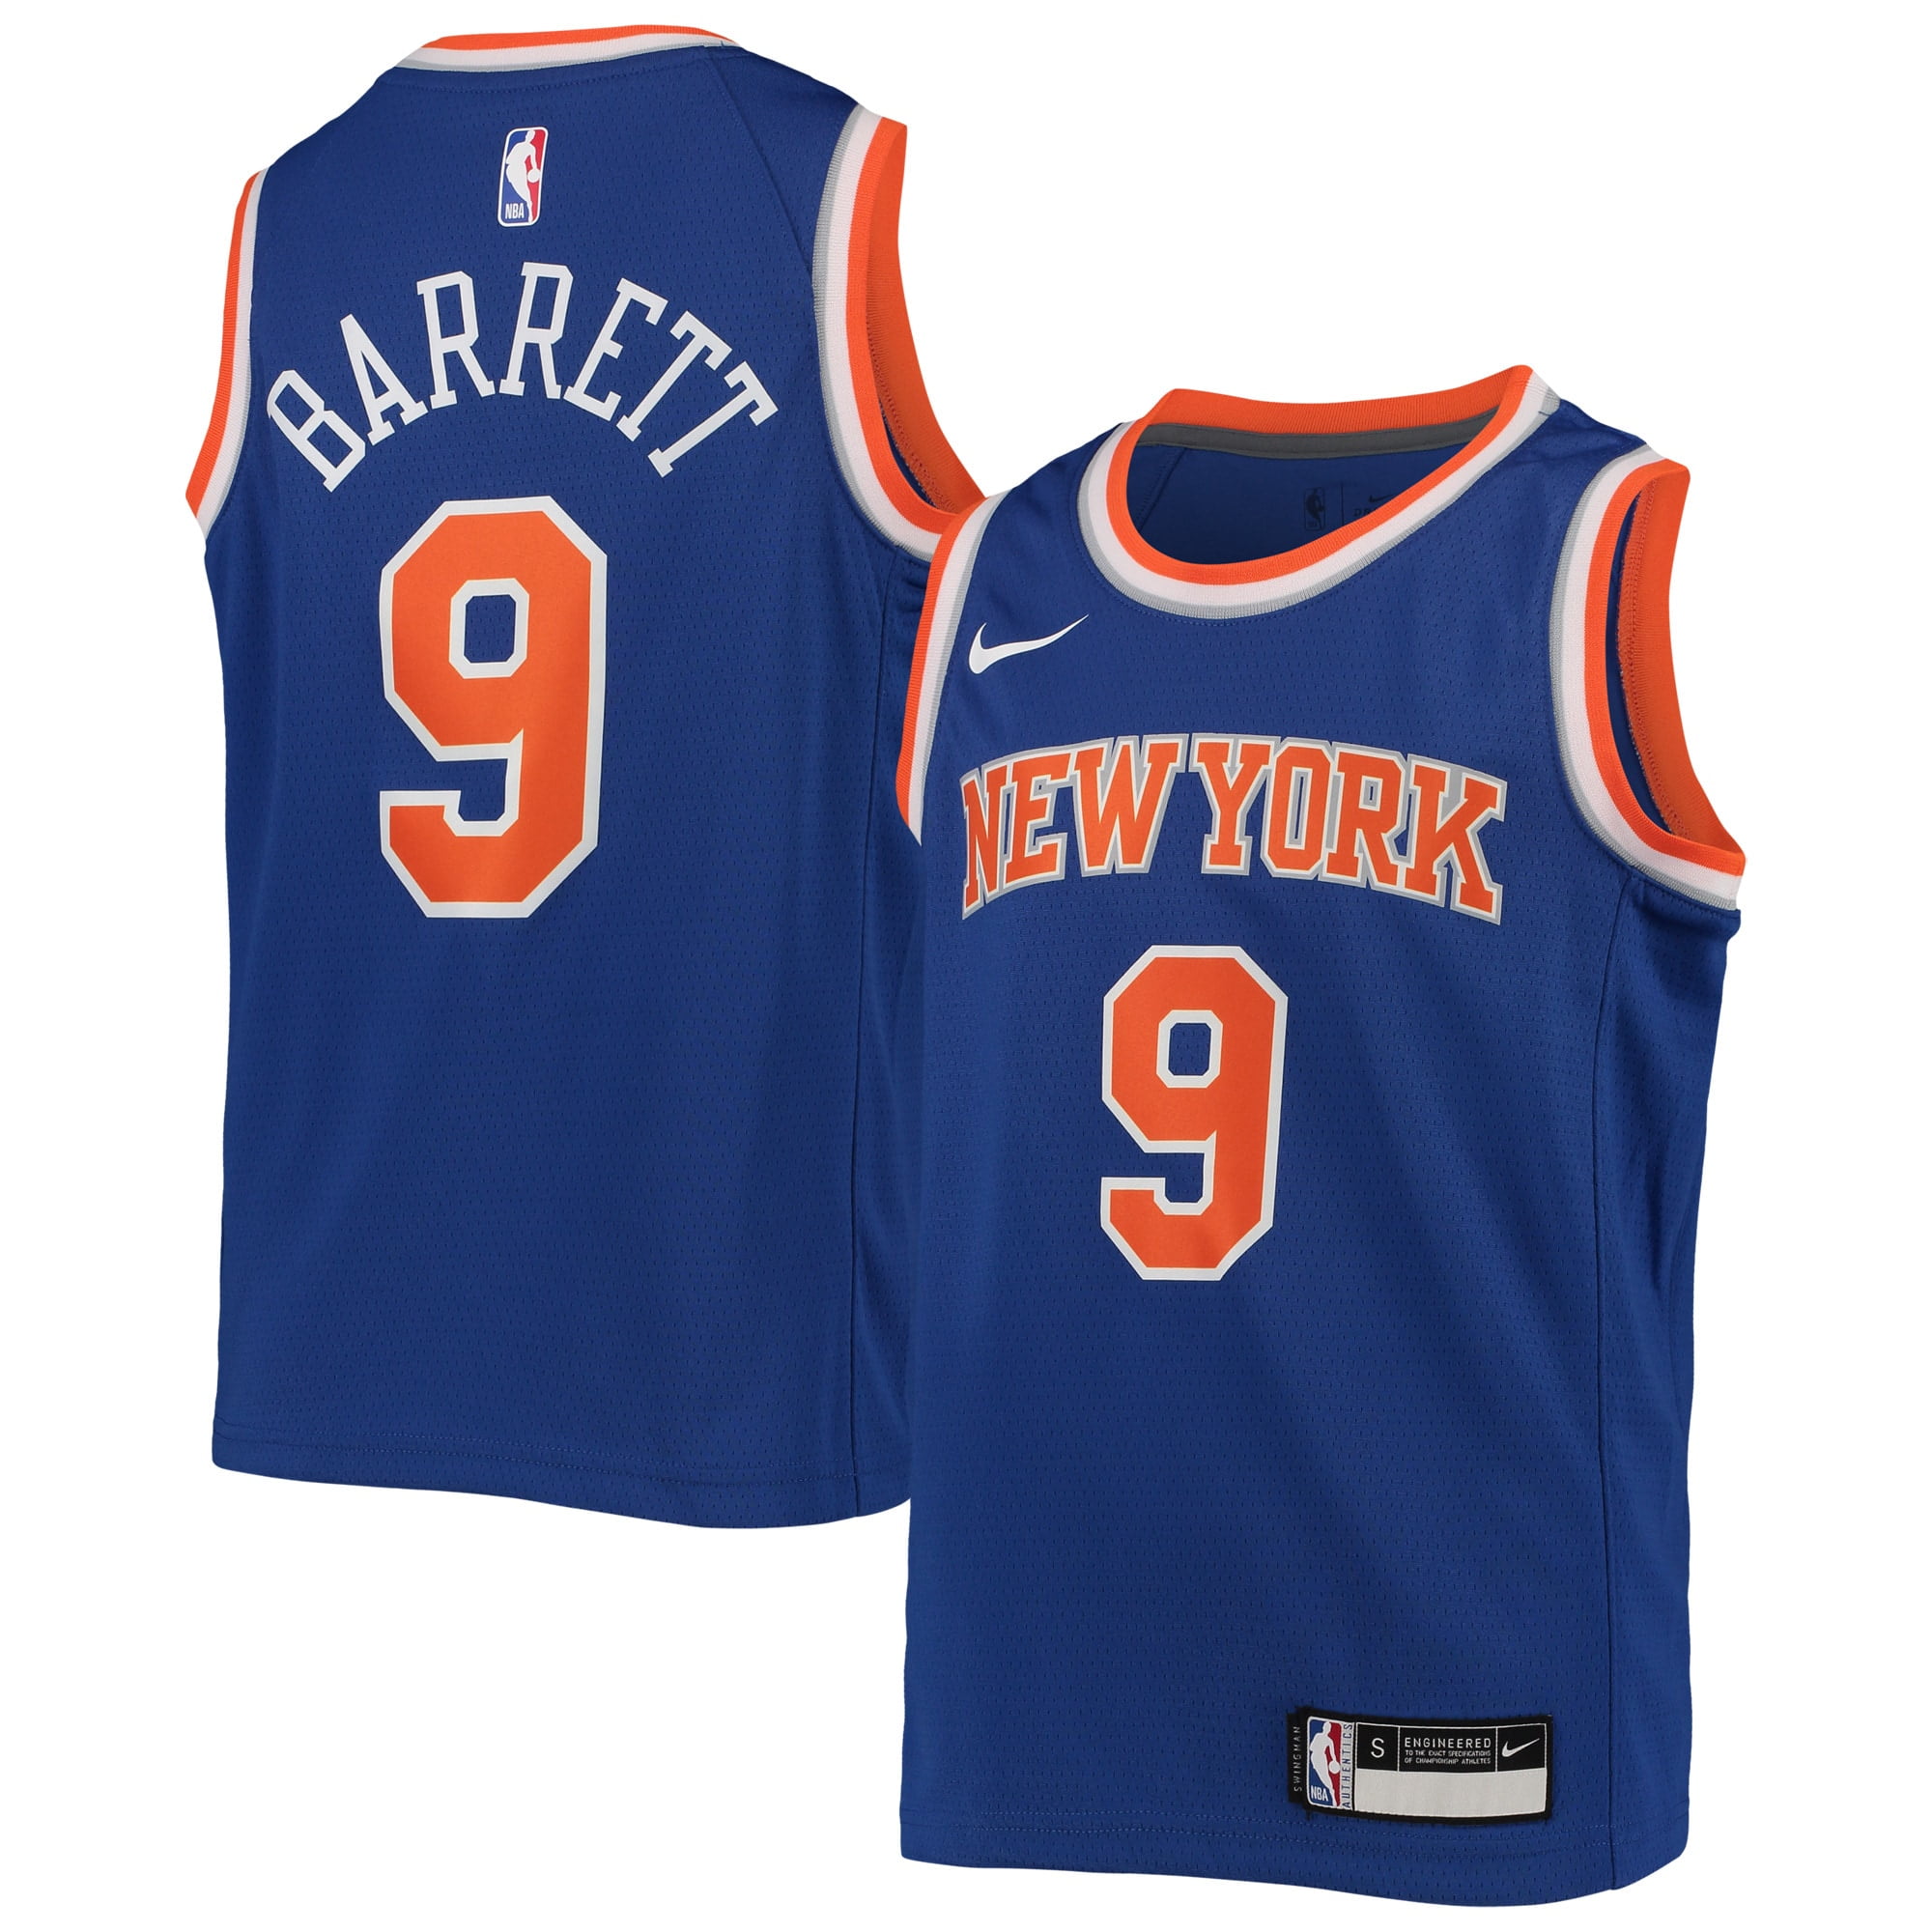 NBA New York KNICKS Practice Jersey REVERSIBLE RUSSELL YOUTH LARGE